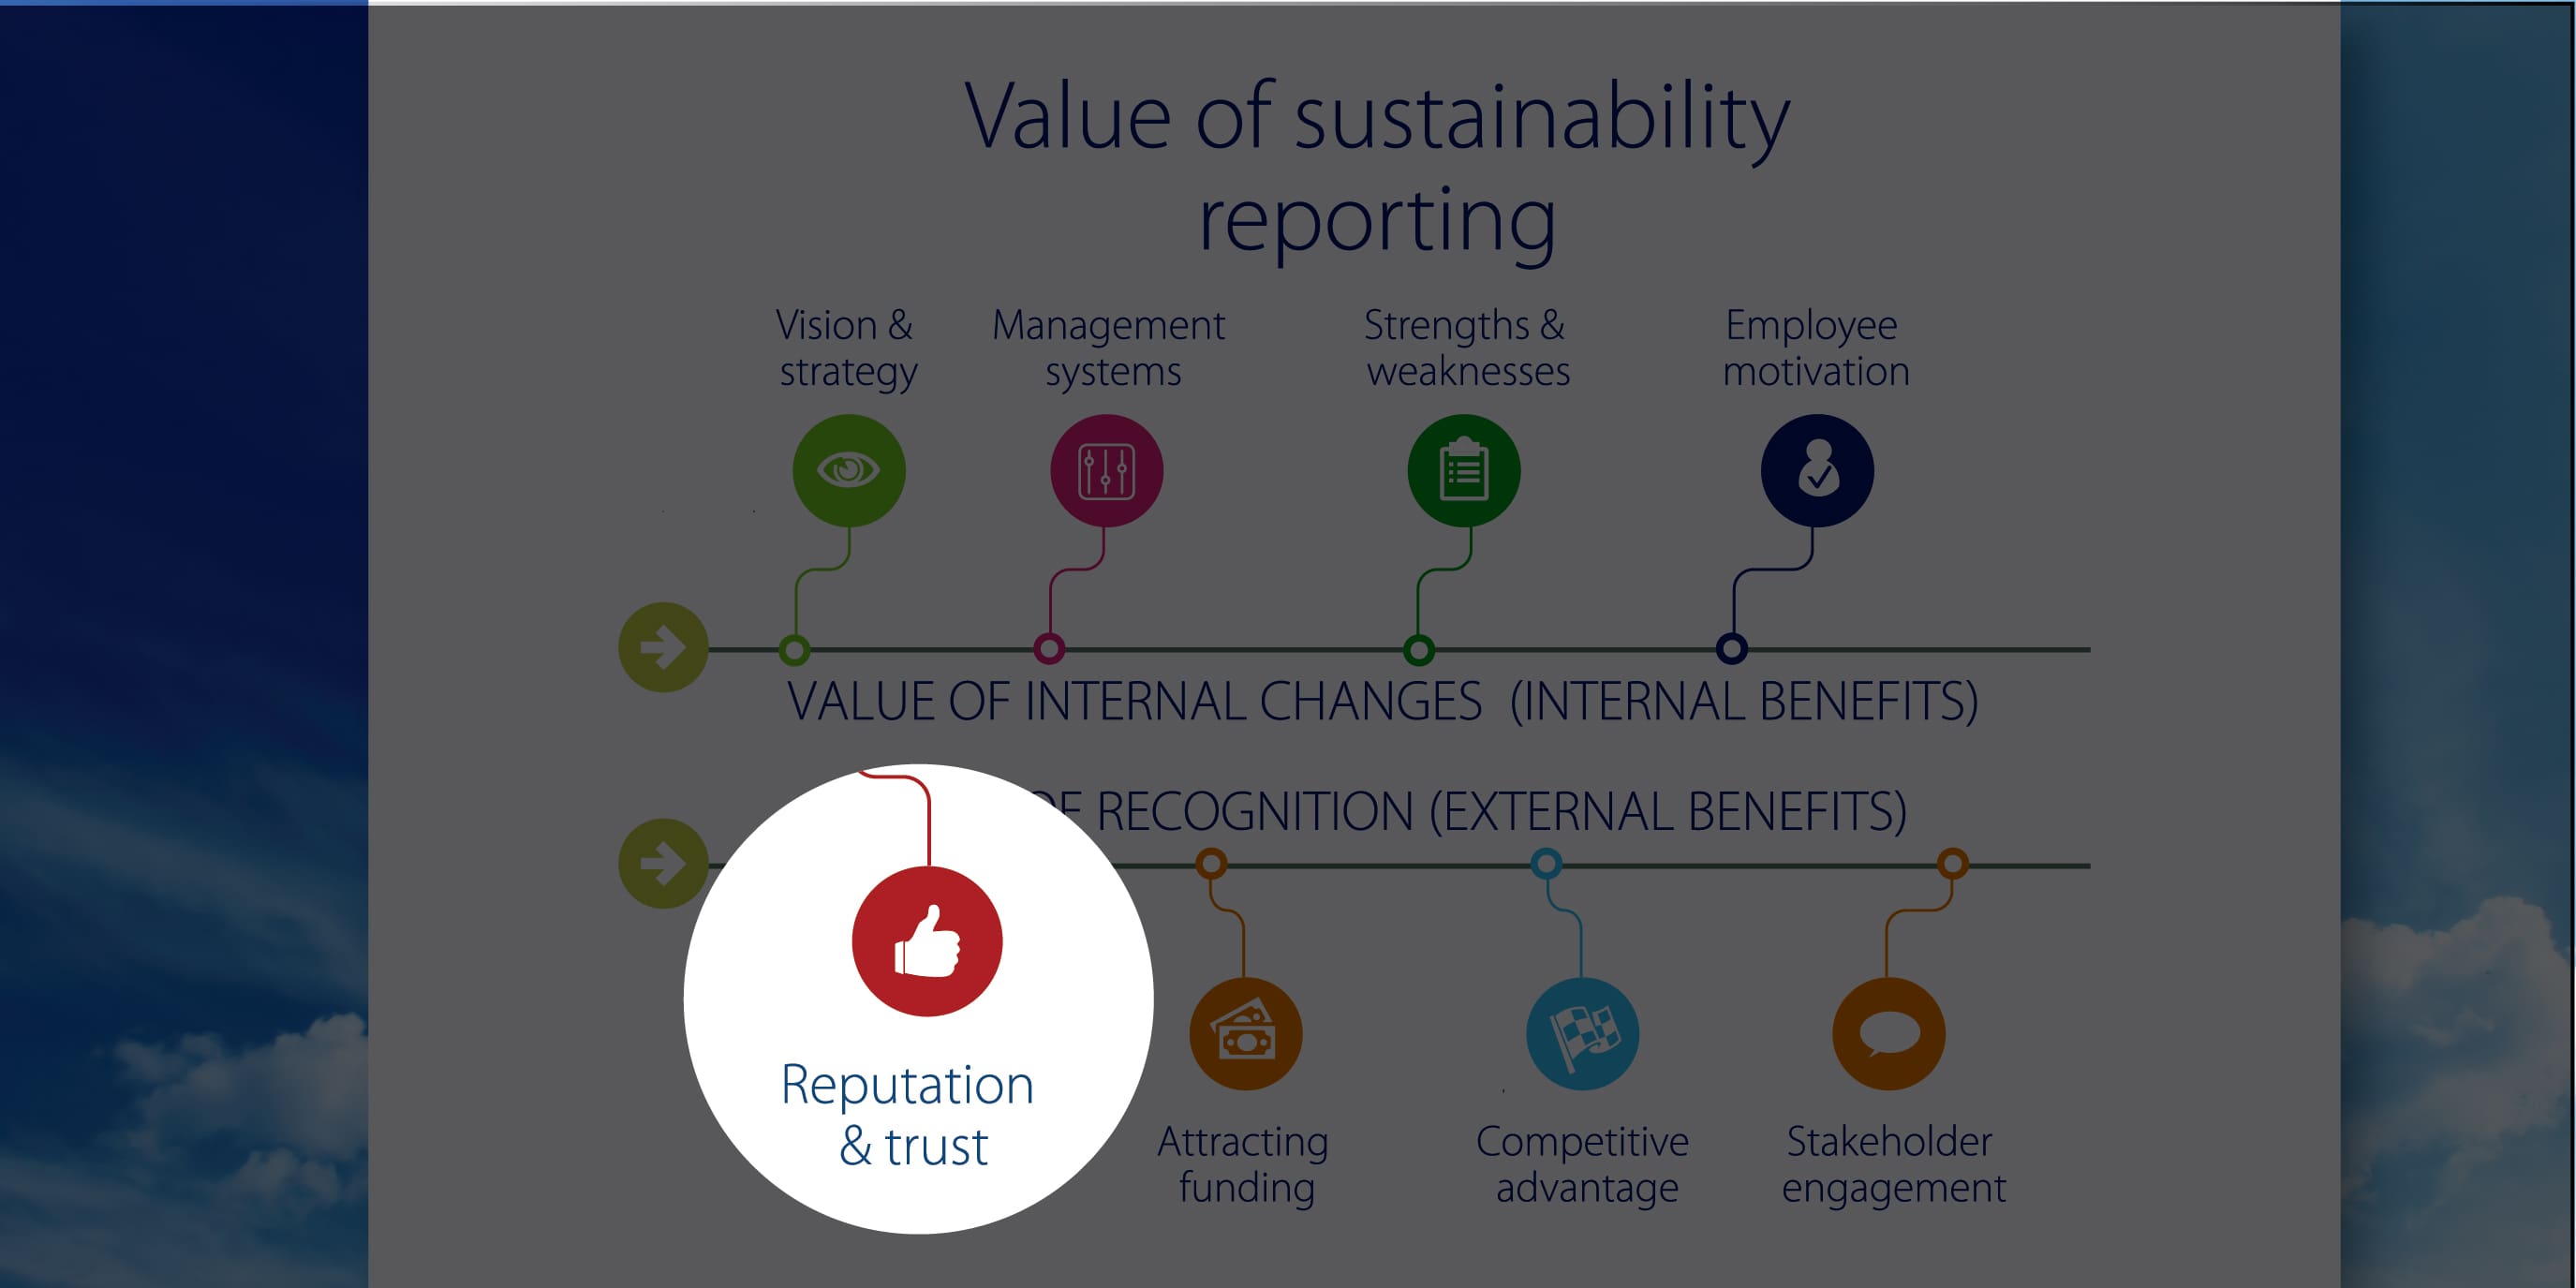 sustainability reporting and reputation risk management an australian case study